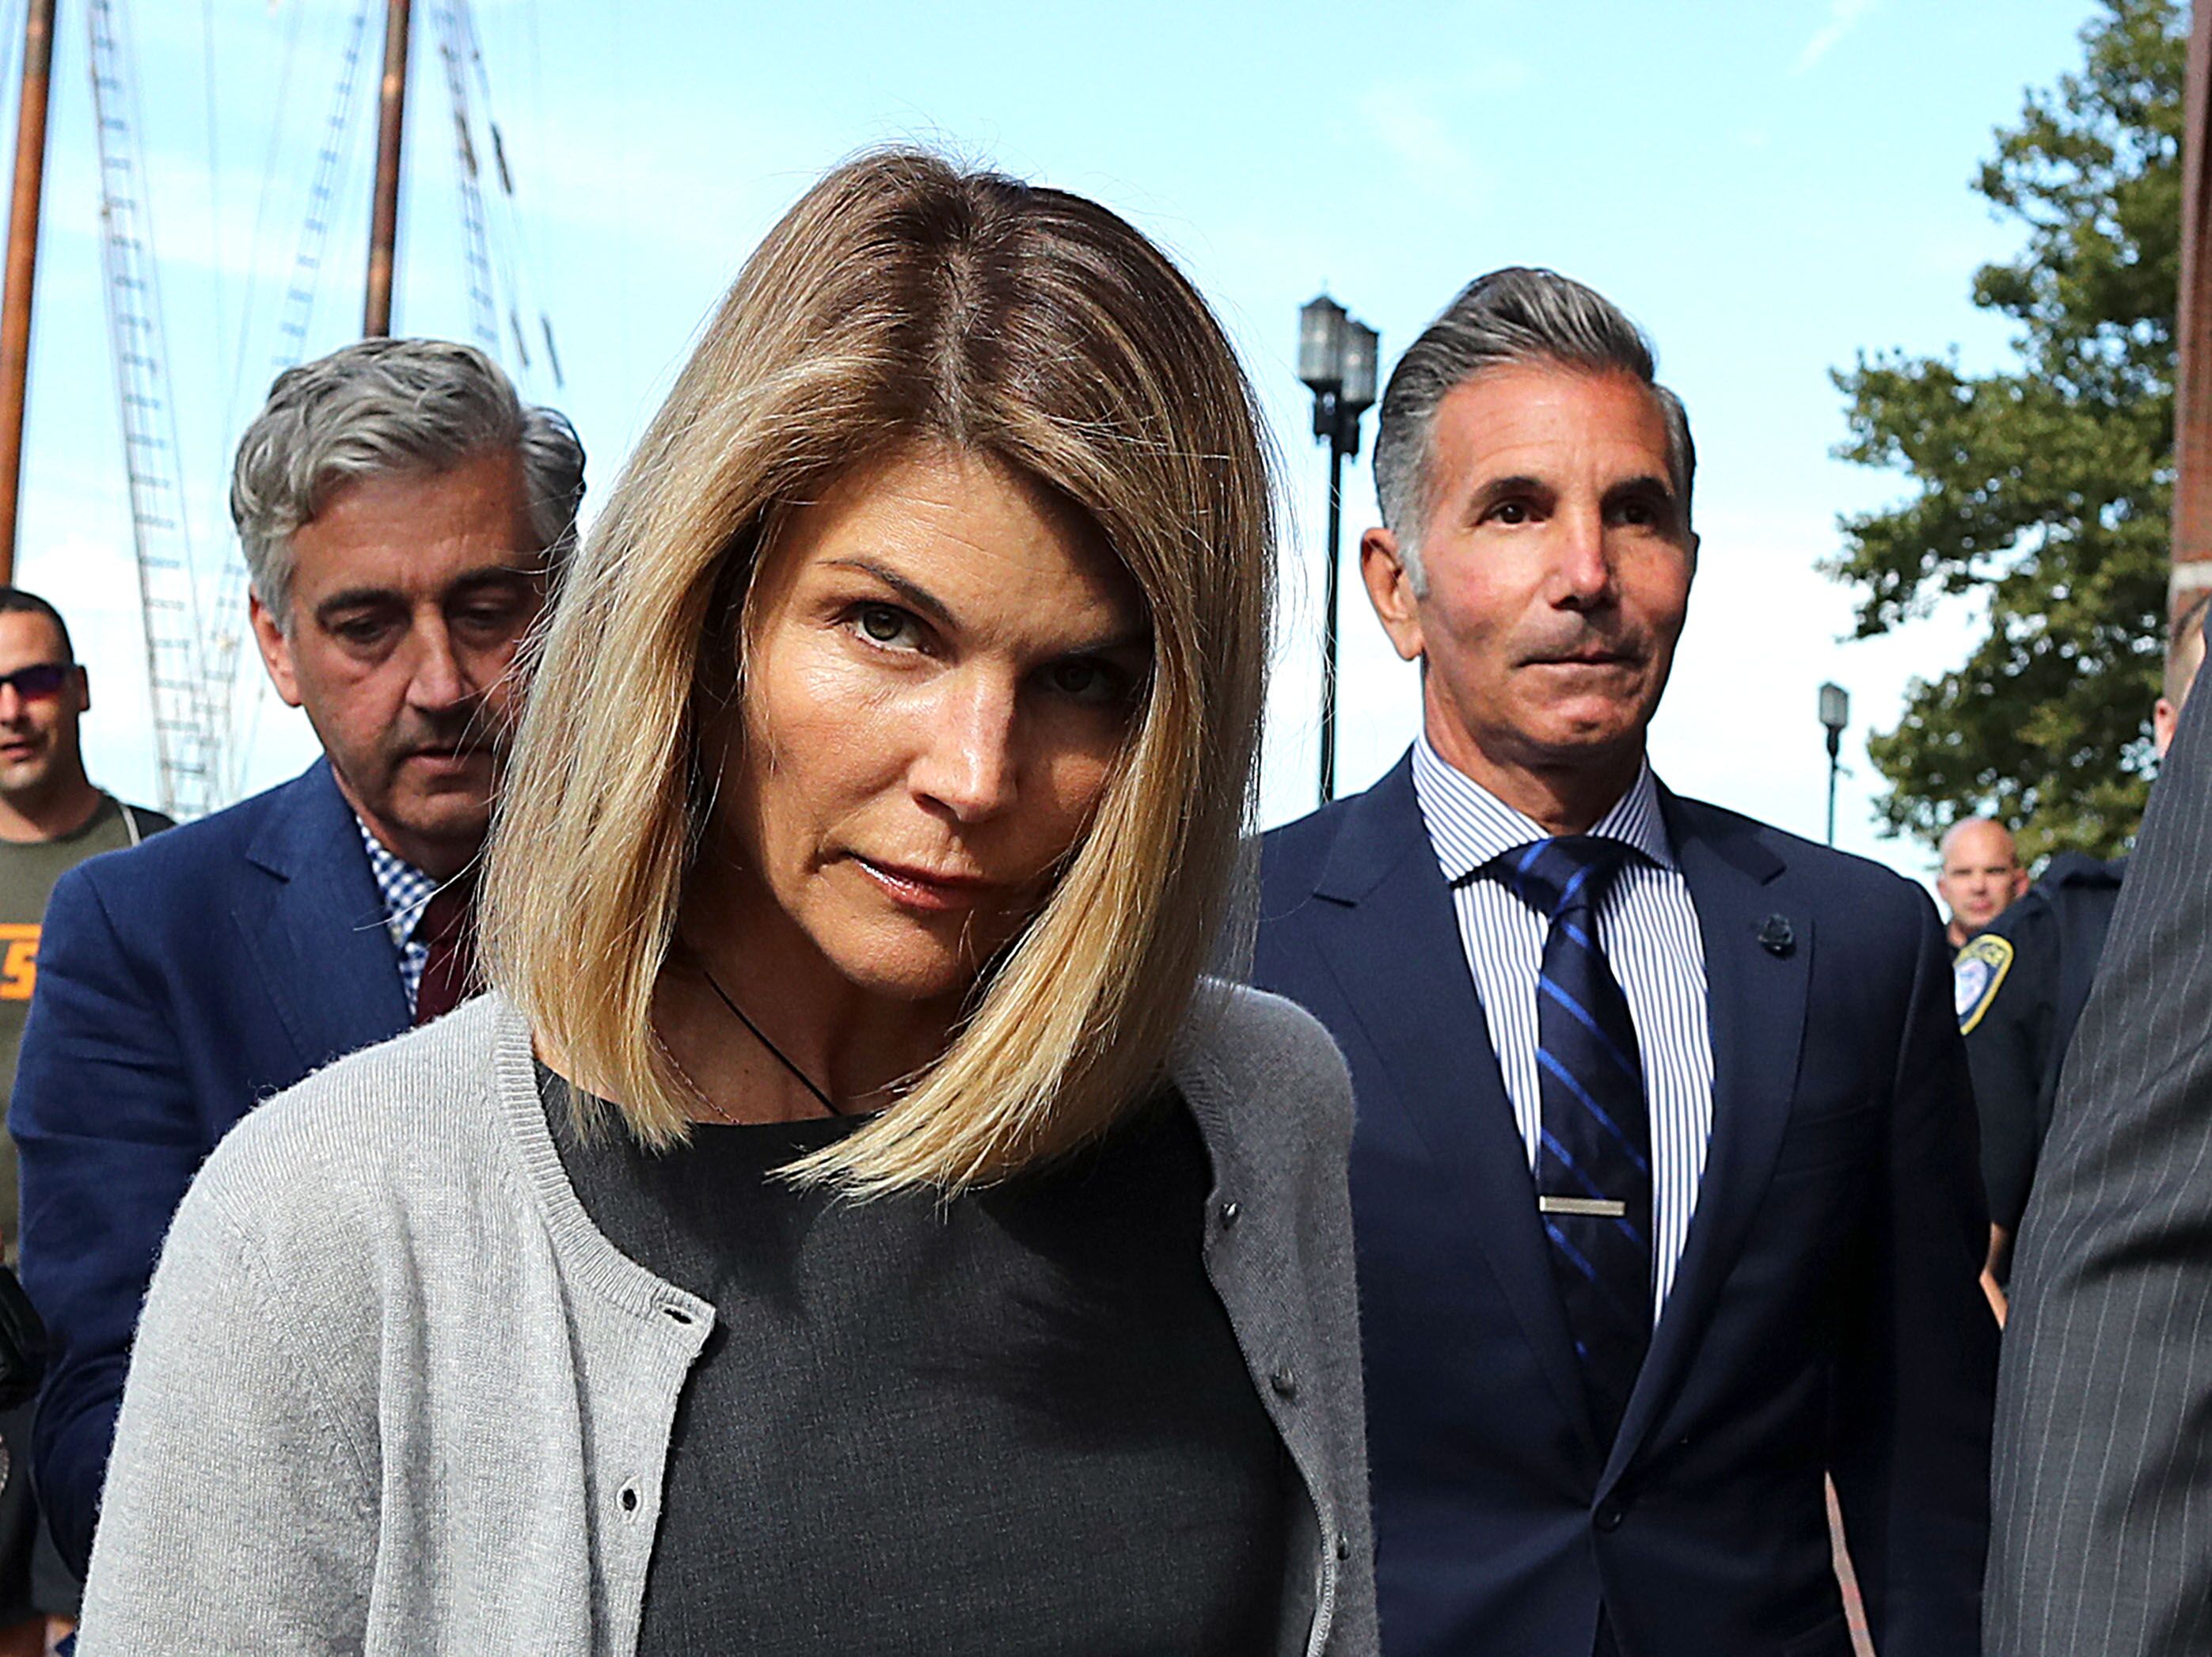 Lori Loughlin and Mossimo Giannulli leave the John Joseph Moakley United States Courthouse in Boston on August 27, 2019. | Source: Getty Images